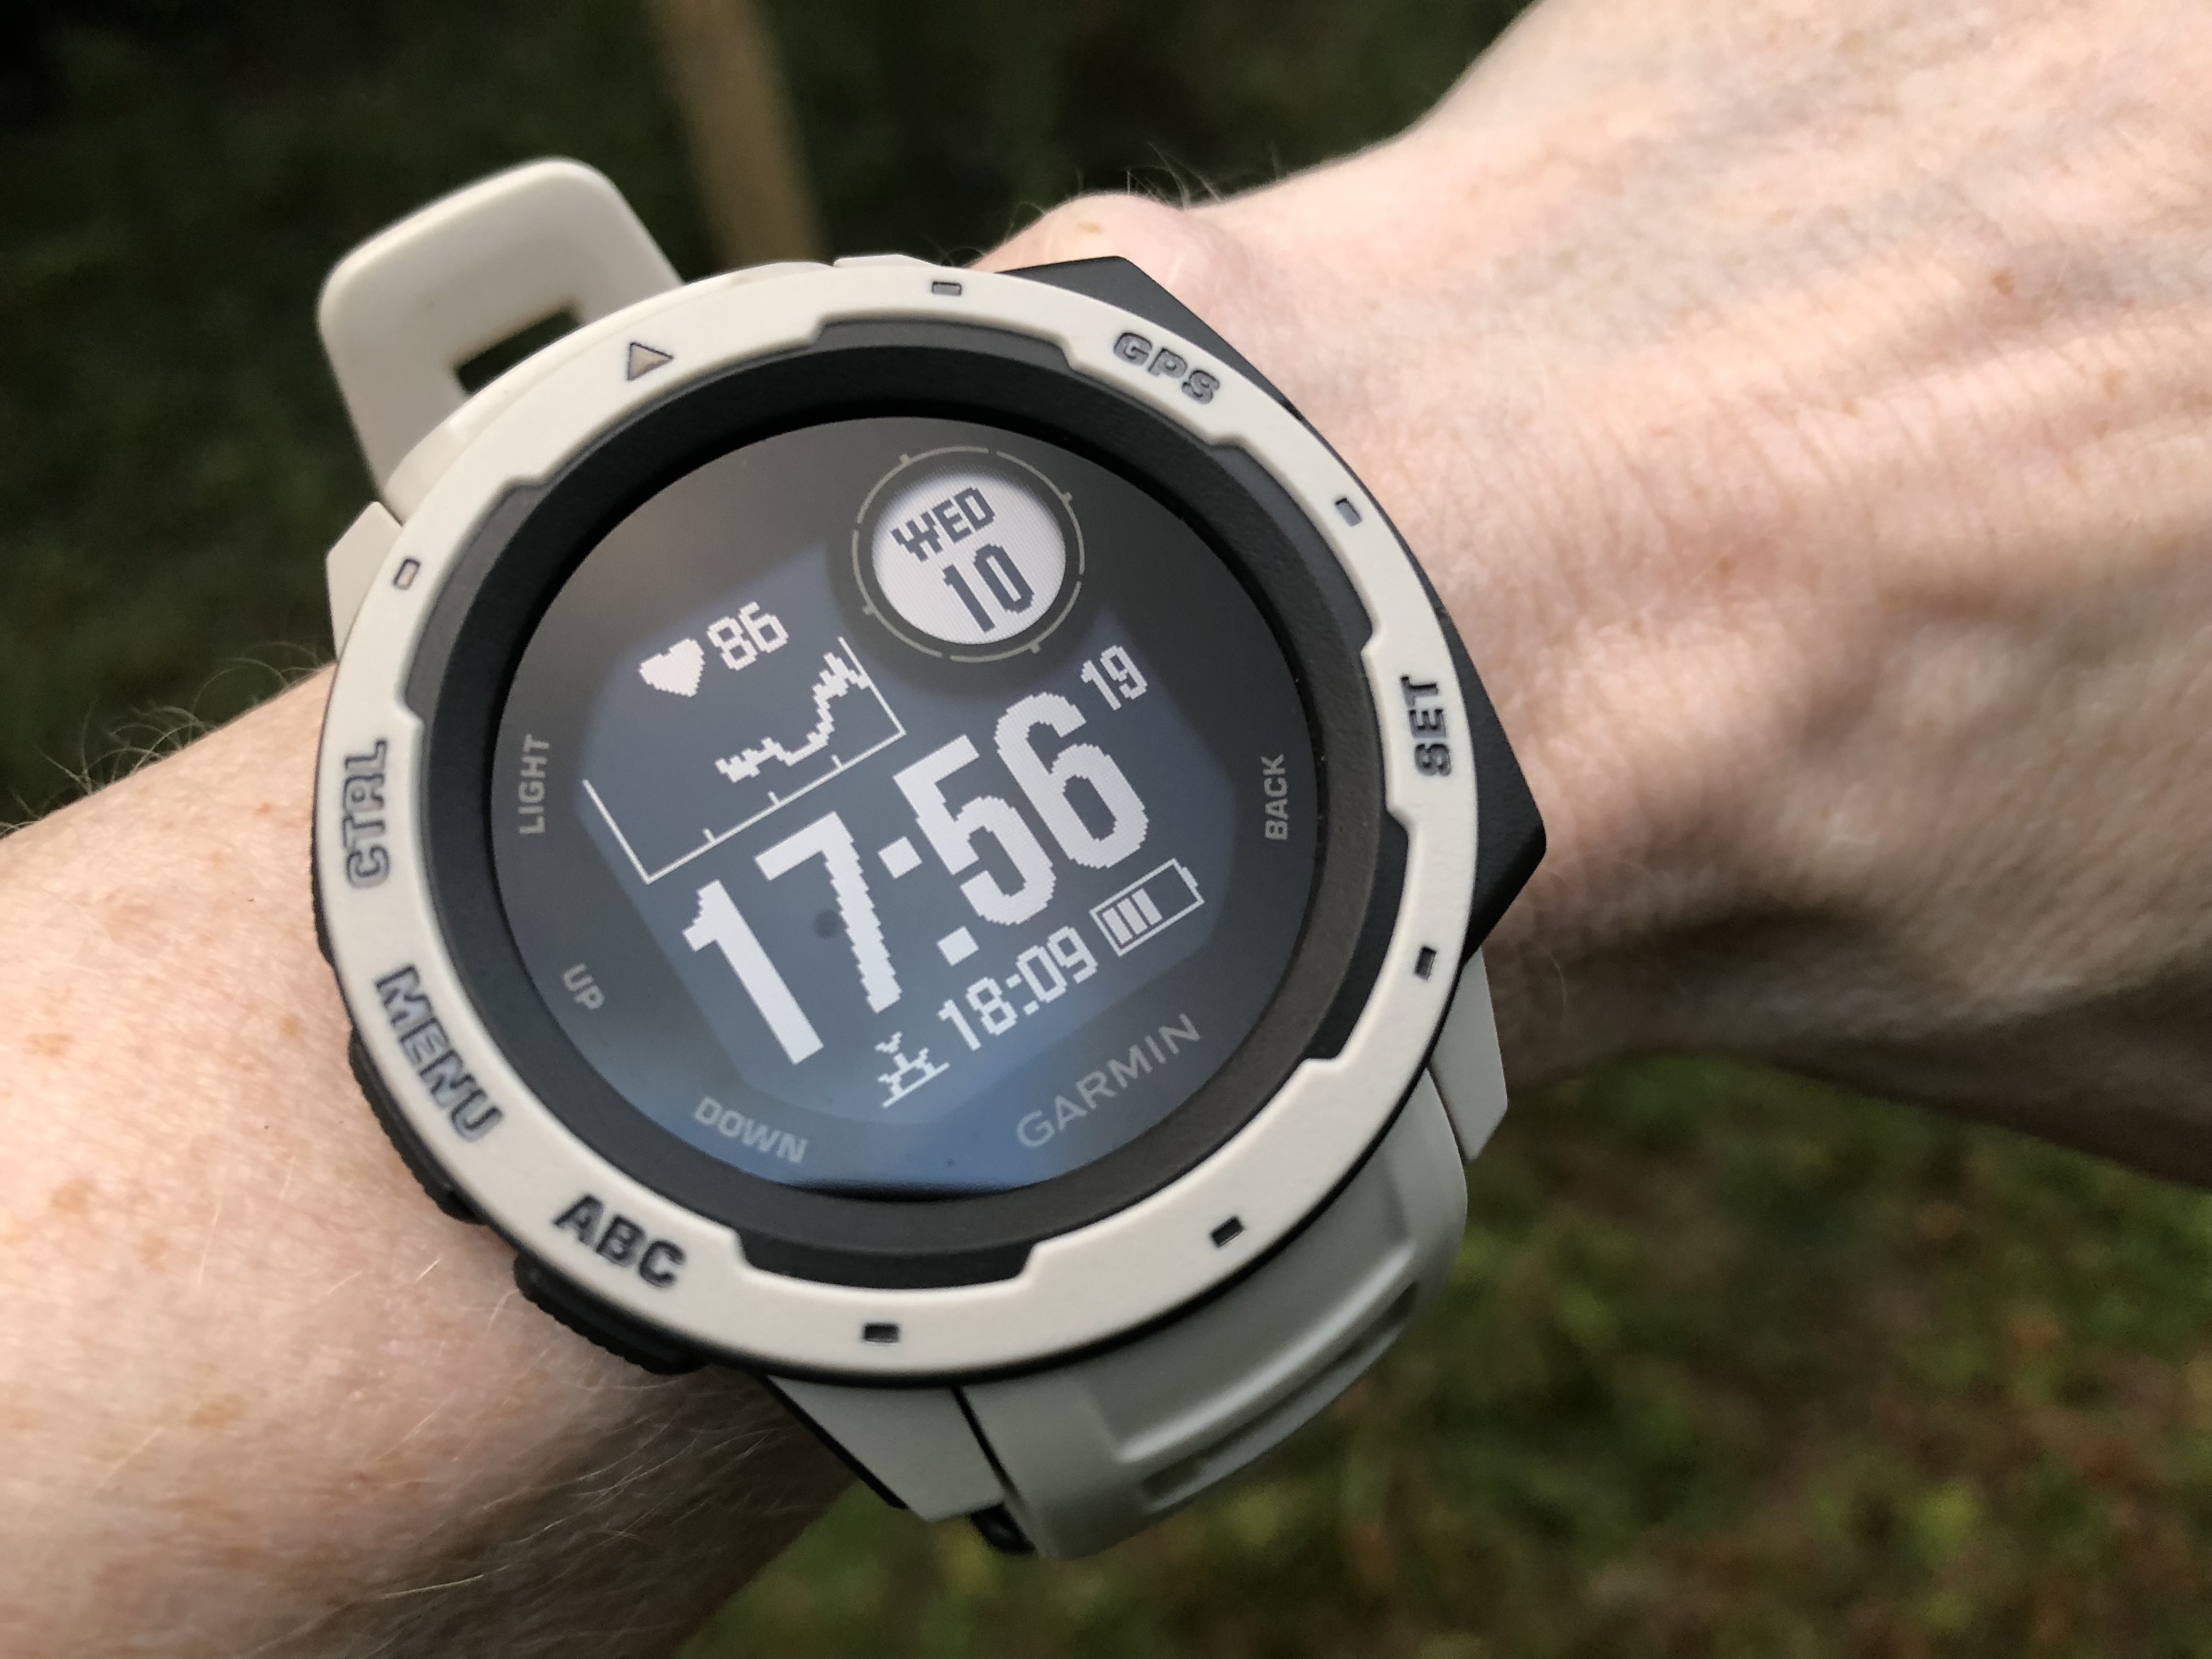 Garmin Instinct Review: An Affordable Adventure Watch for the Outdoors